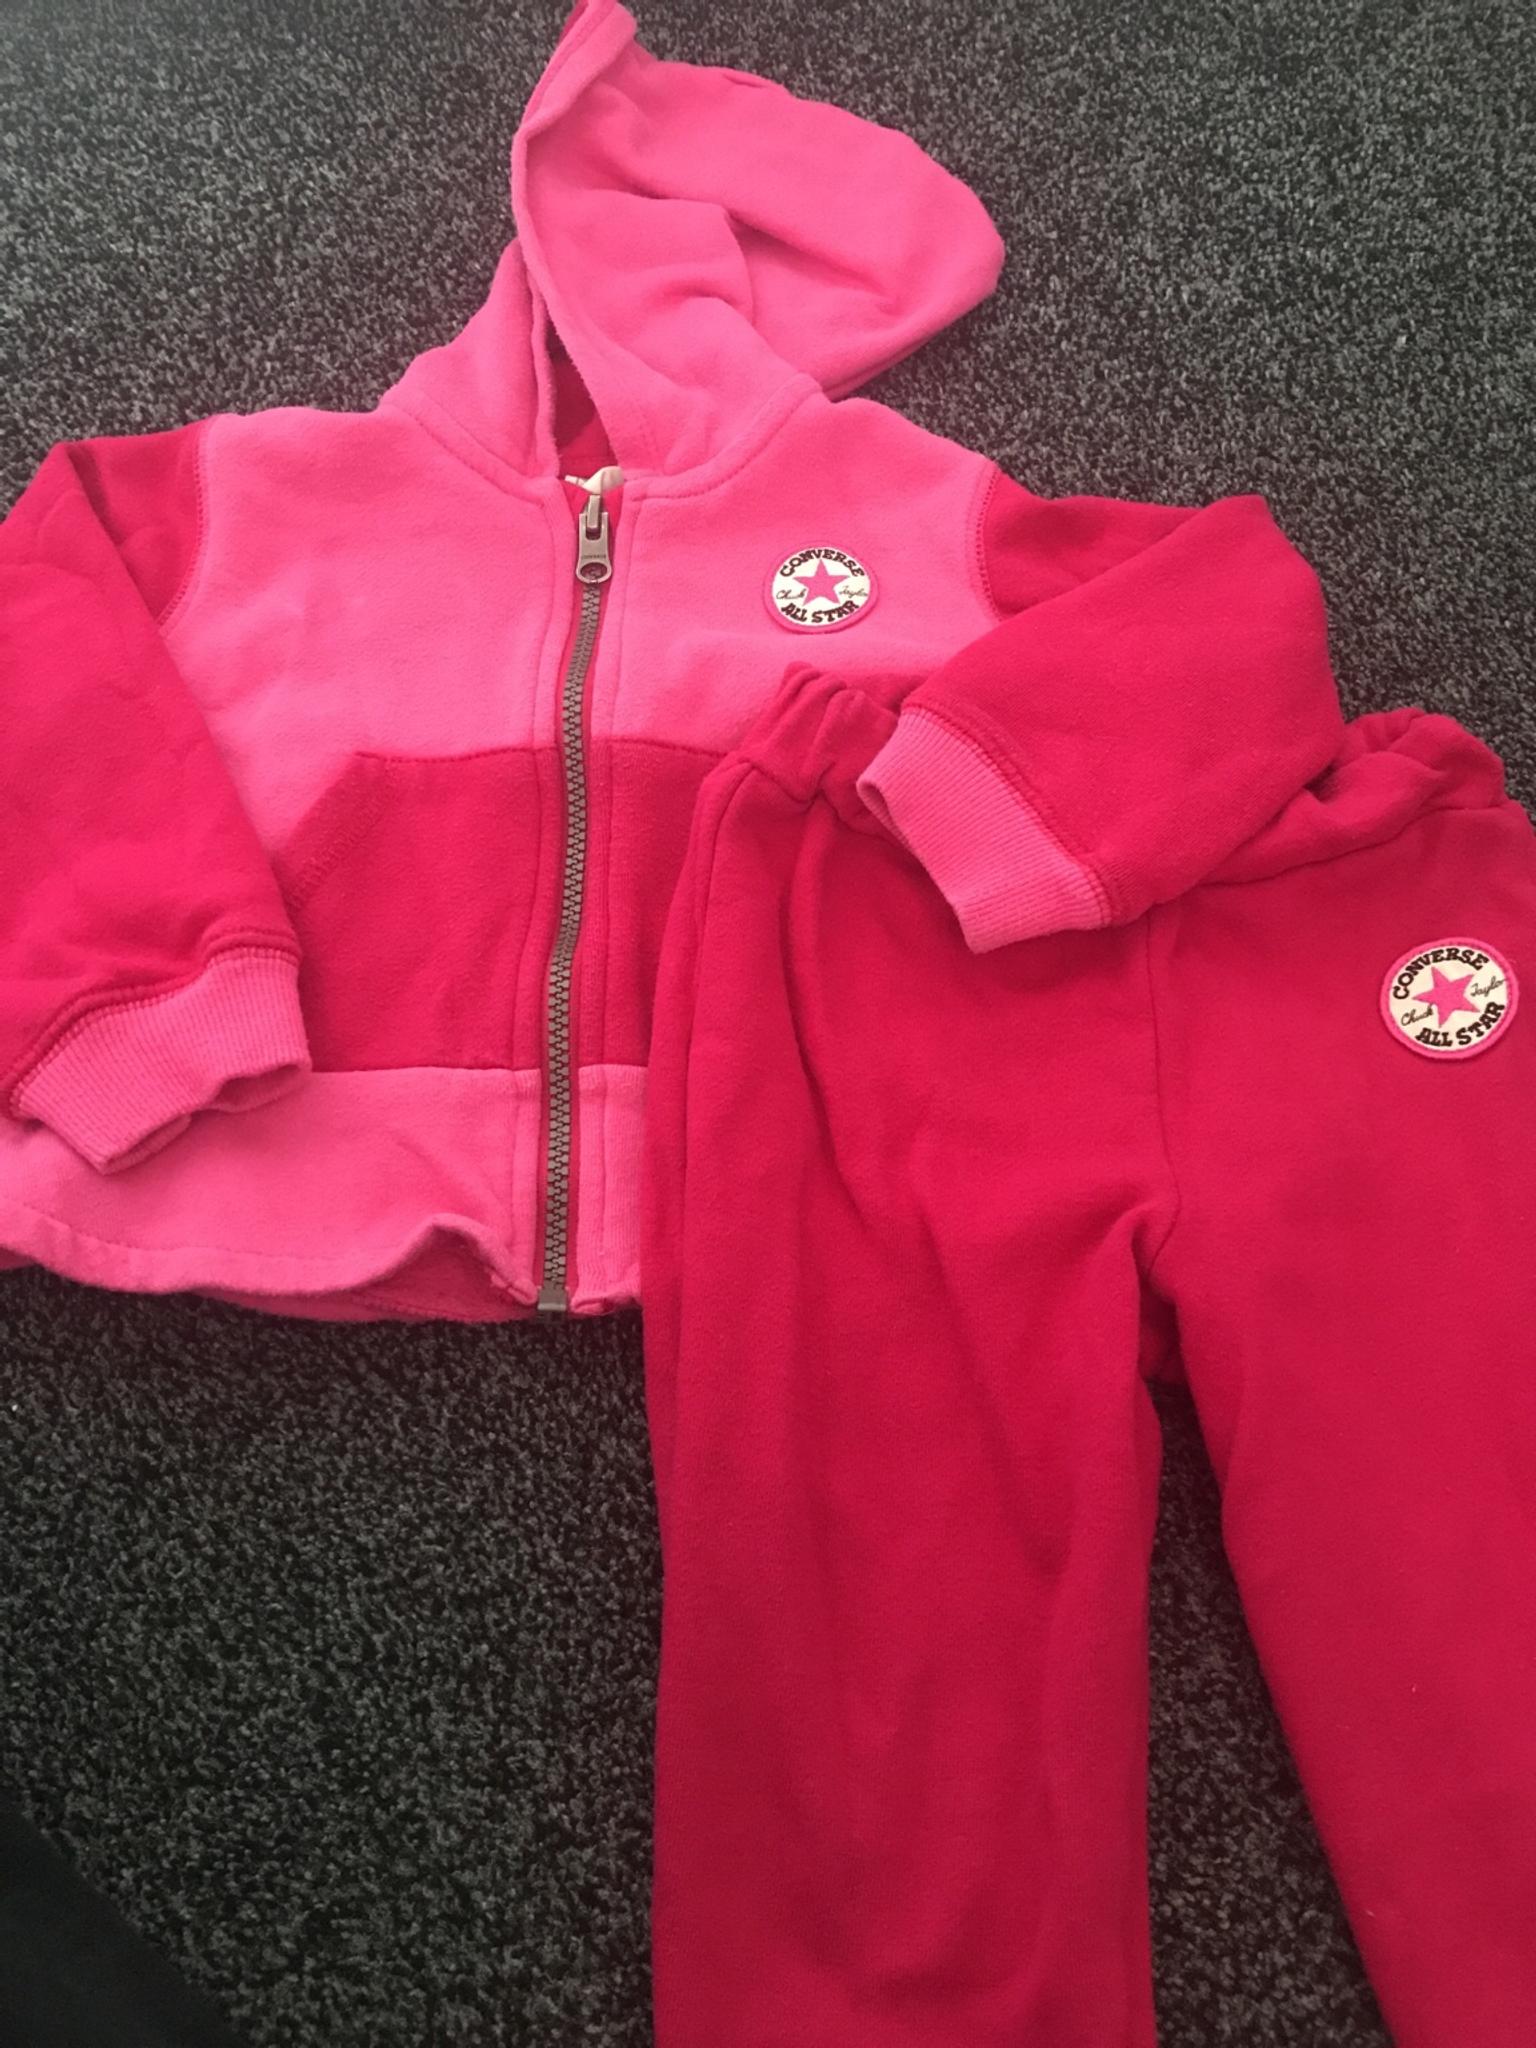 Baby girls Converse tracksuit 24 months in SE12 London for £1.50 for sale |  Shpock